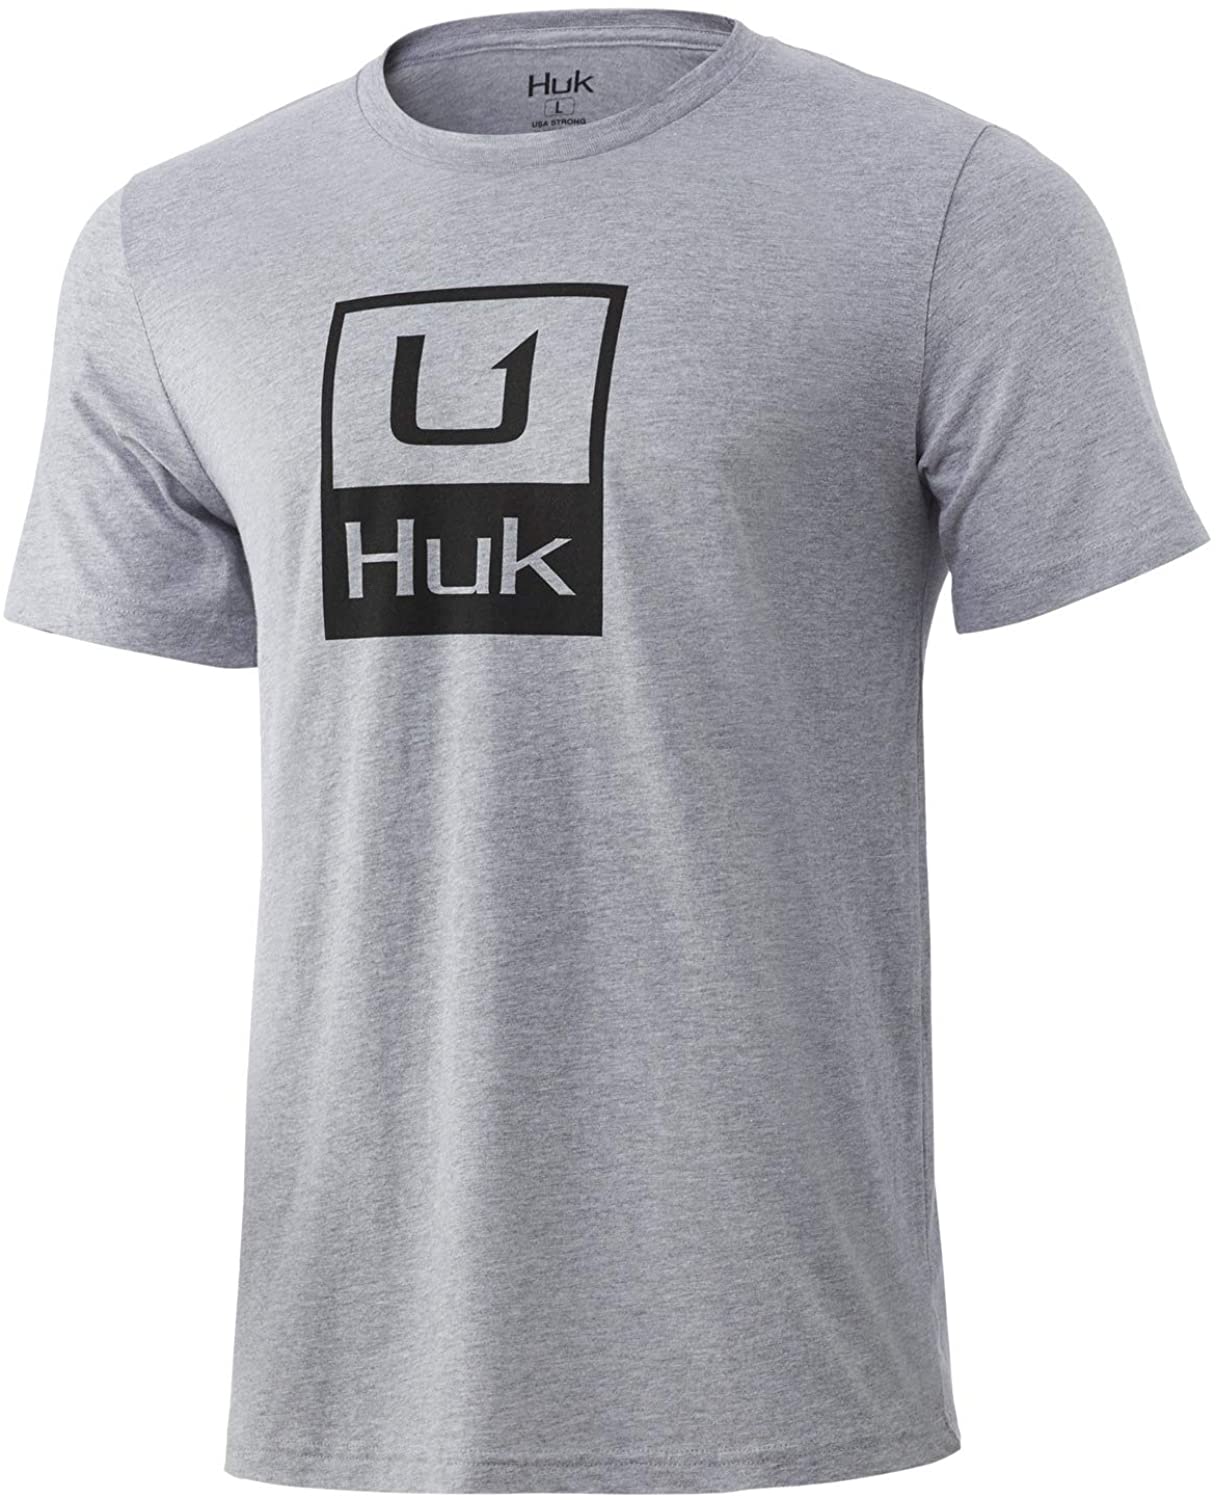 Men's Huk Huk'd Up Performance Tee in Sharkskin Heather from the front